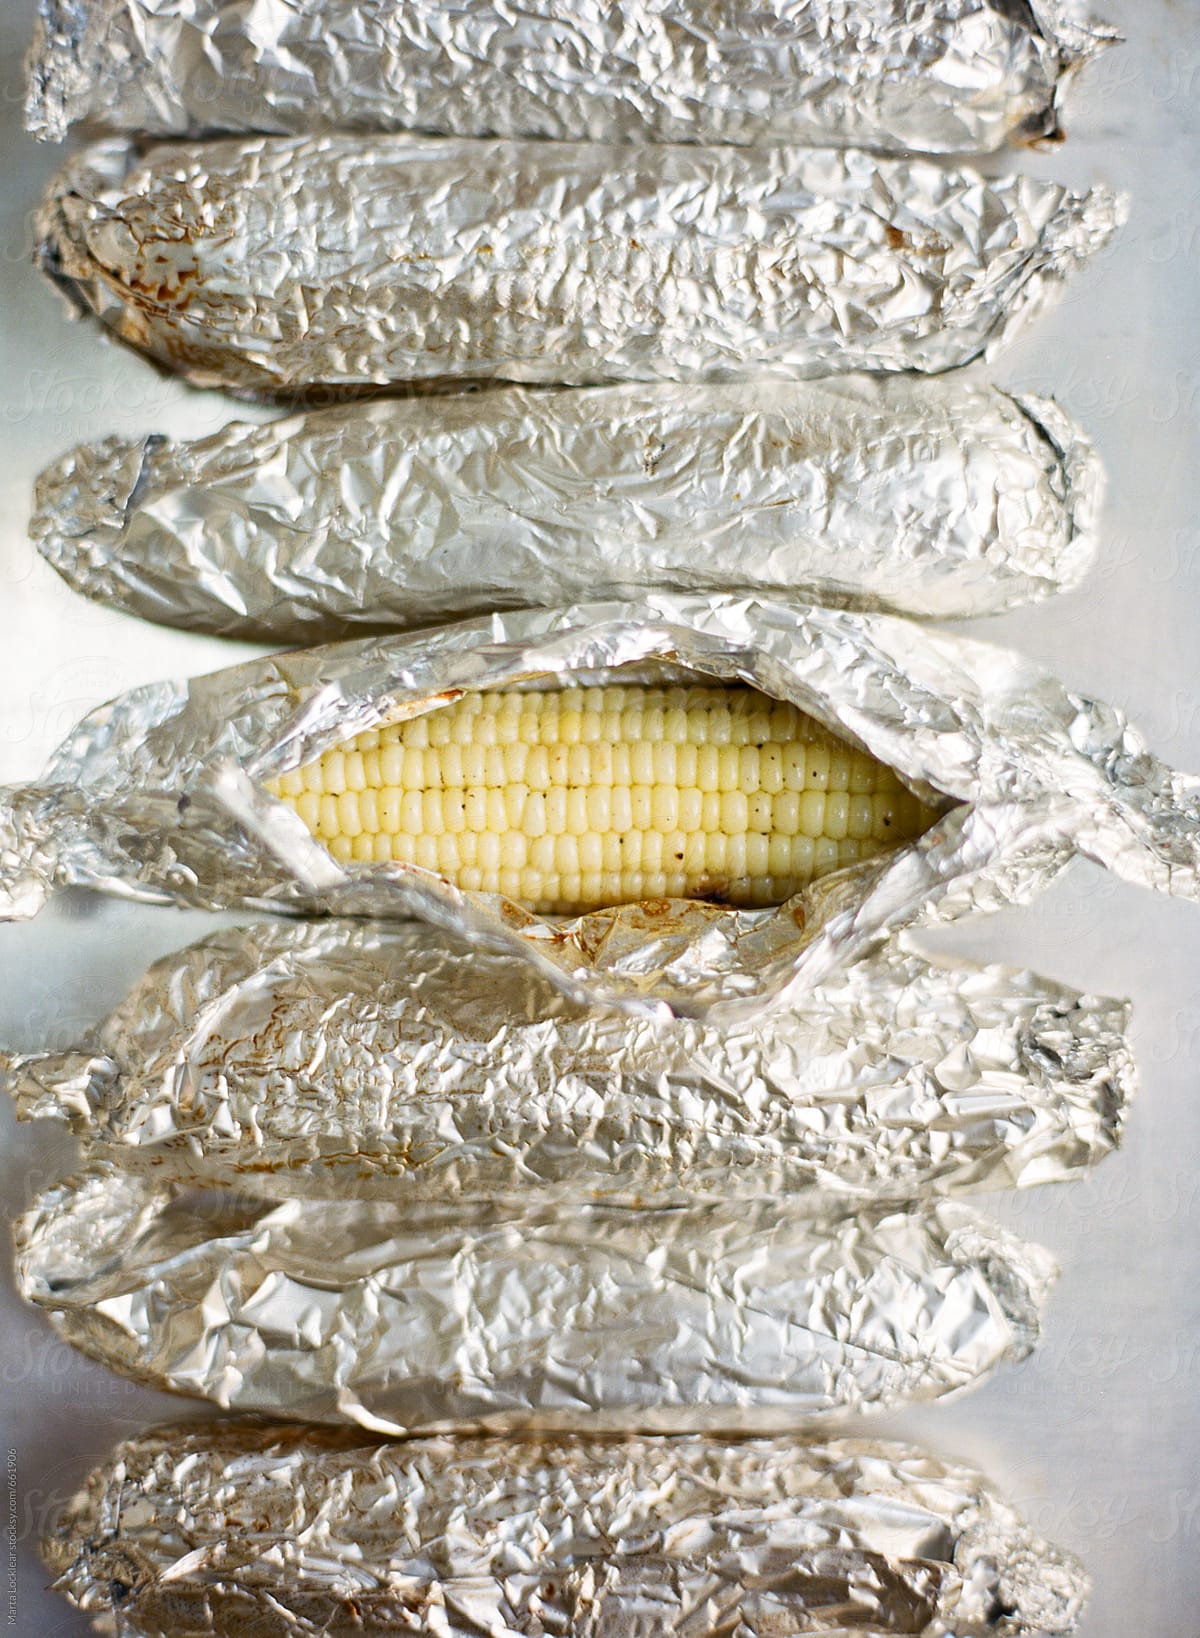 Corn on the cob cooked in aluminum foil